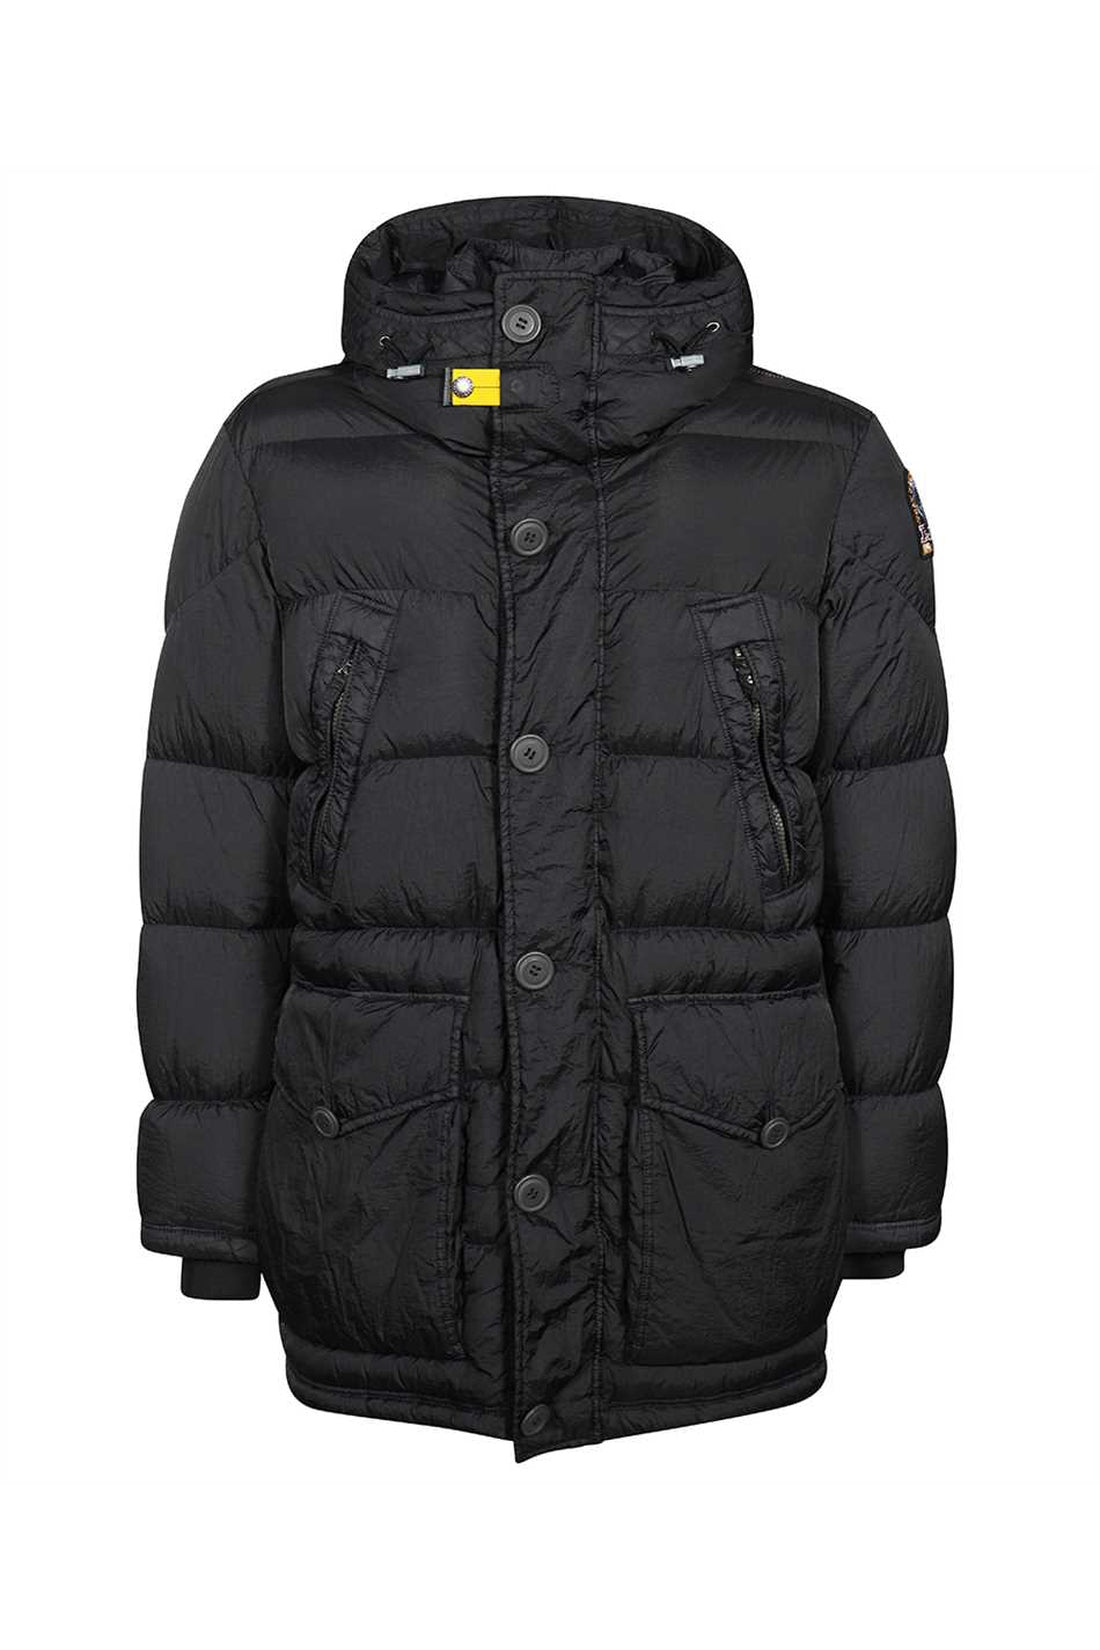 Parajumpers-OUTLET-SALE-Sheridan hooded down jacket-ARCHIVIST